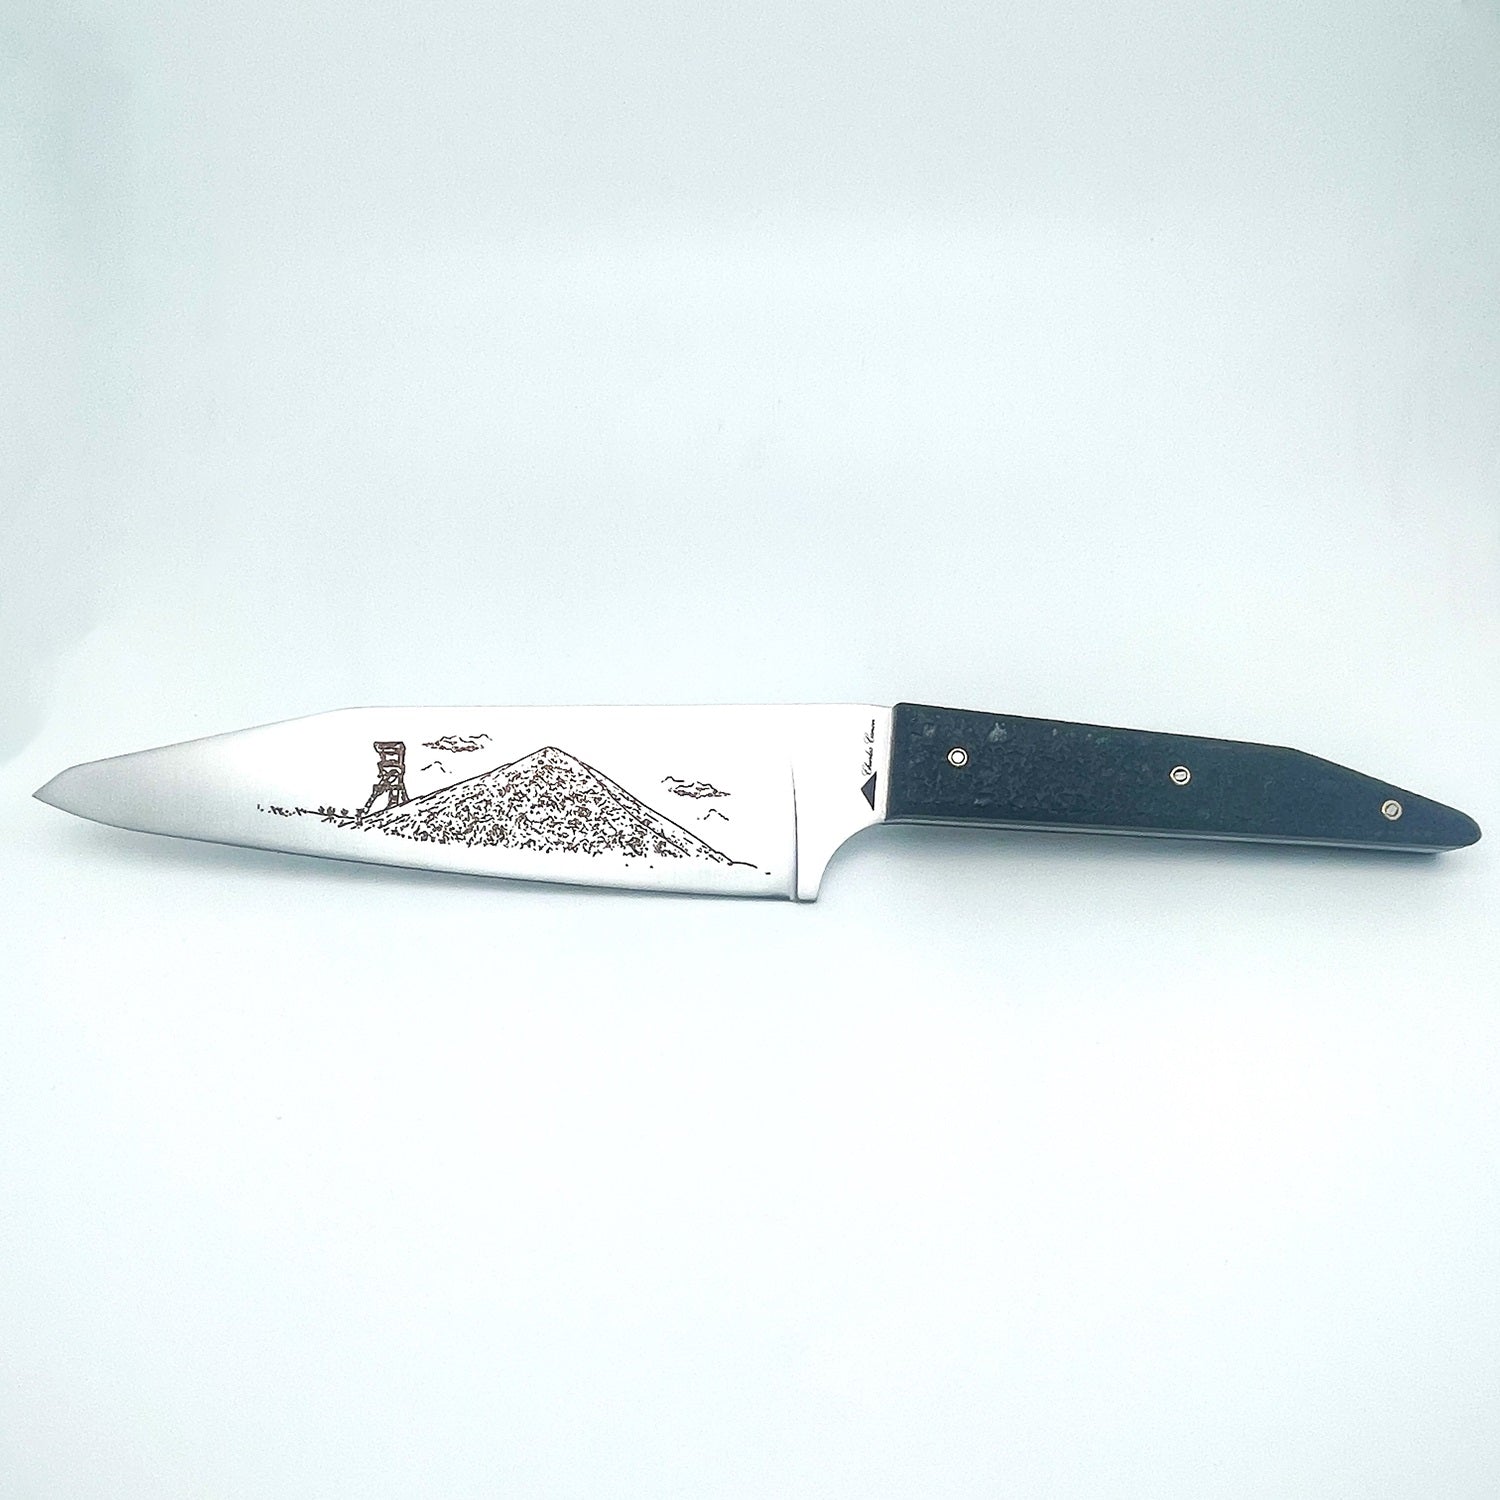 Chef's knife with raw charcoal handle